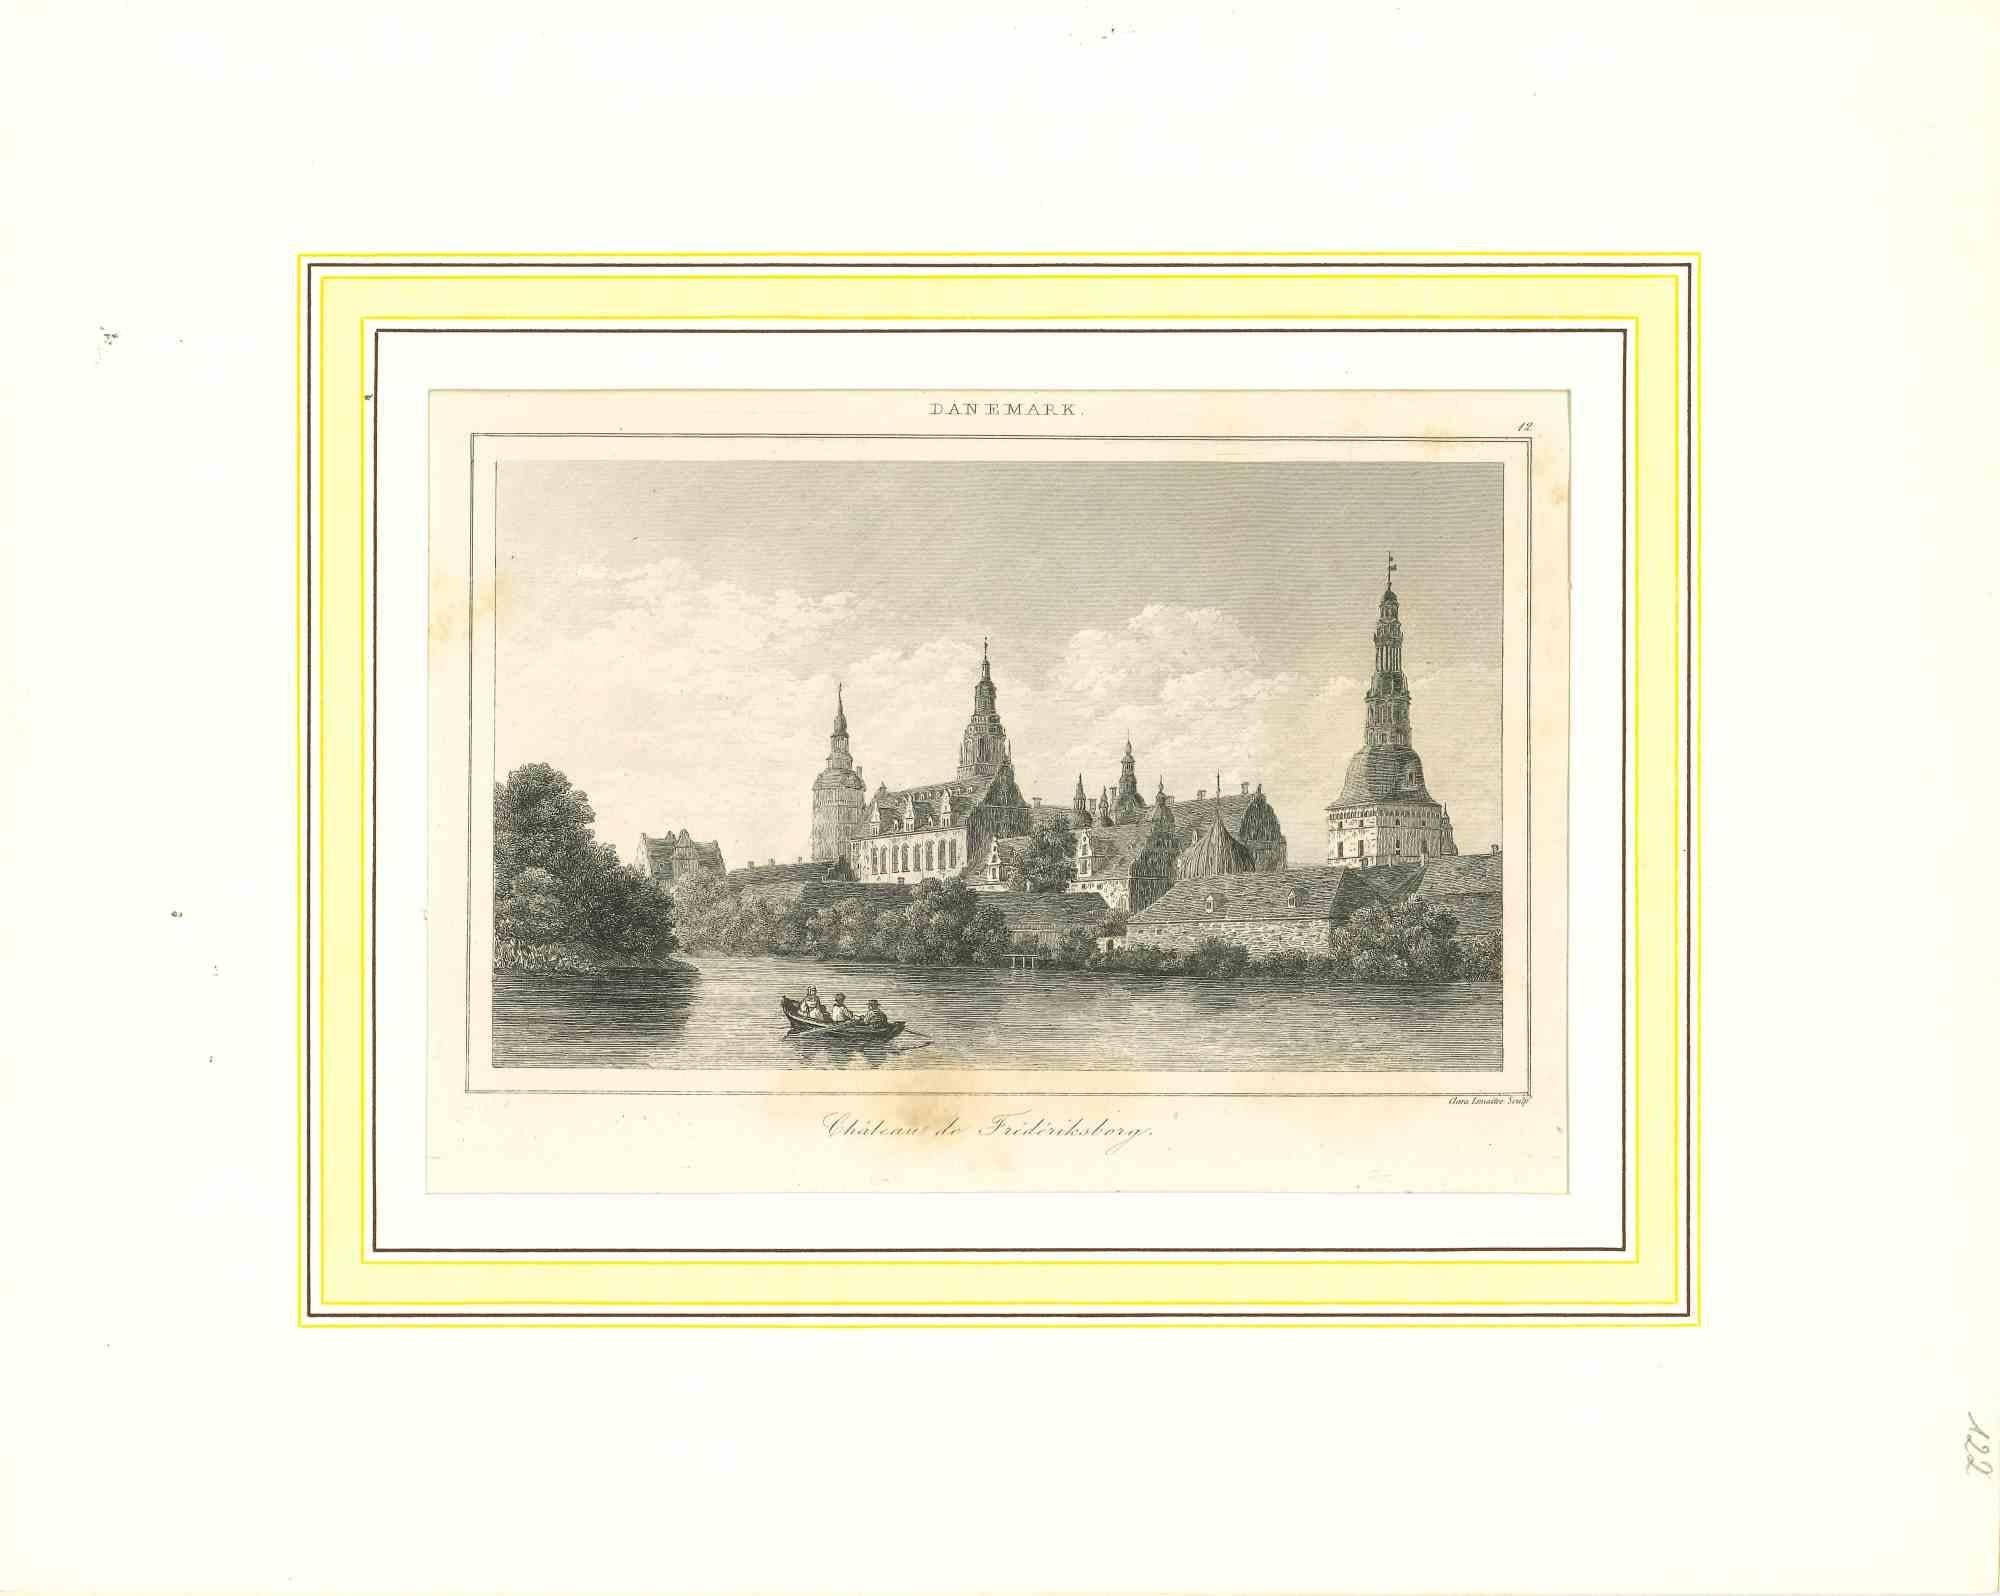 Unknown Landscape Print - Ancient View of Chateau de Frederiksborg - Lithograph on Paper - Early 1800